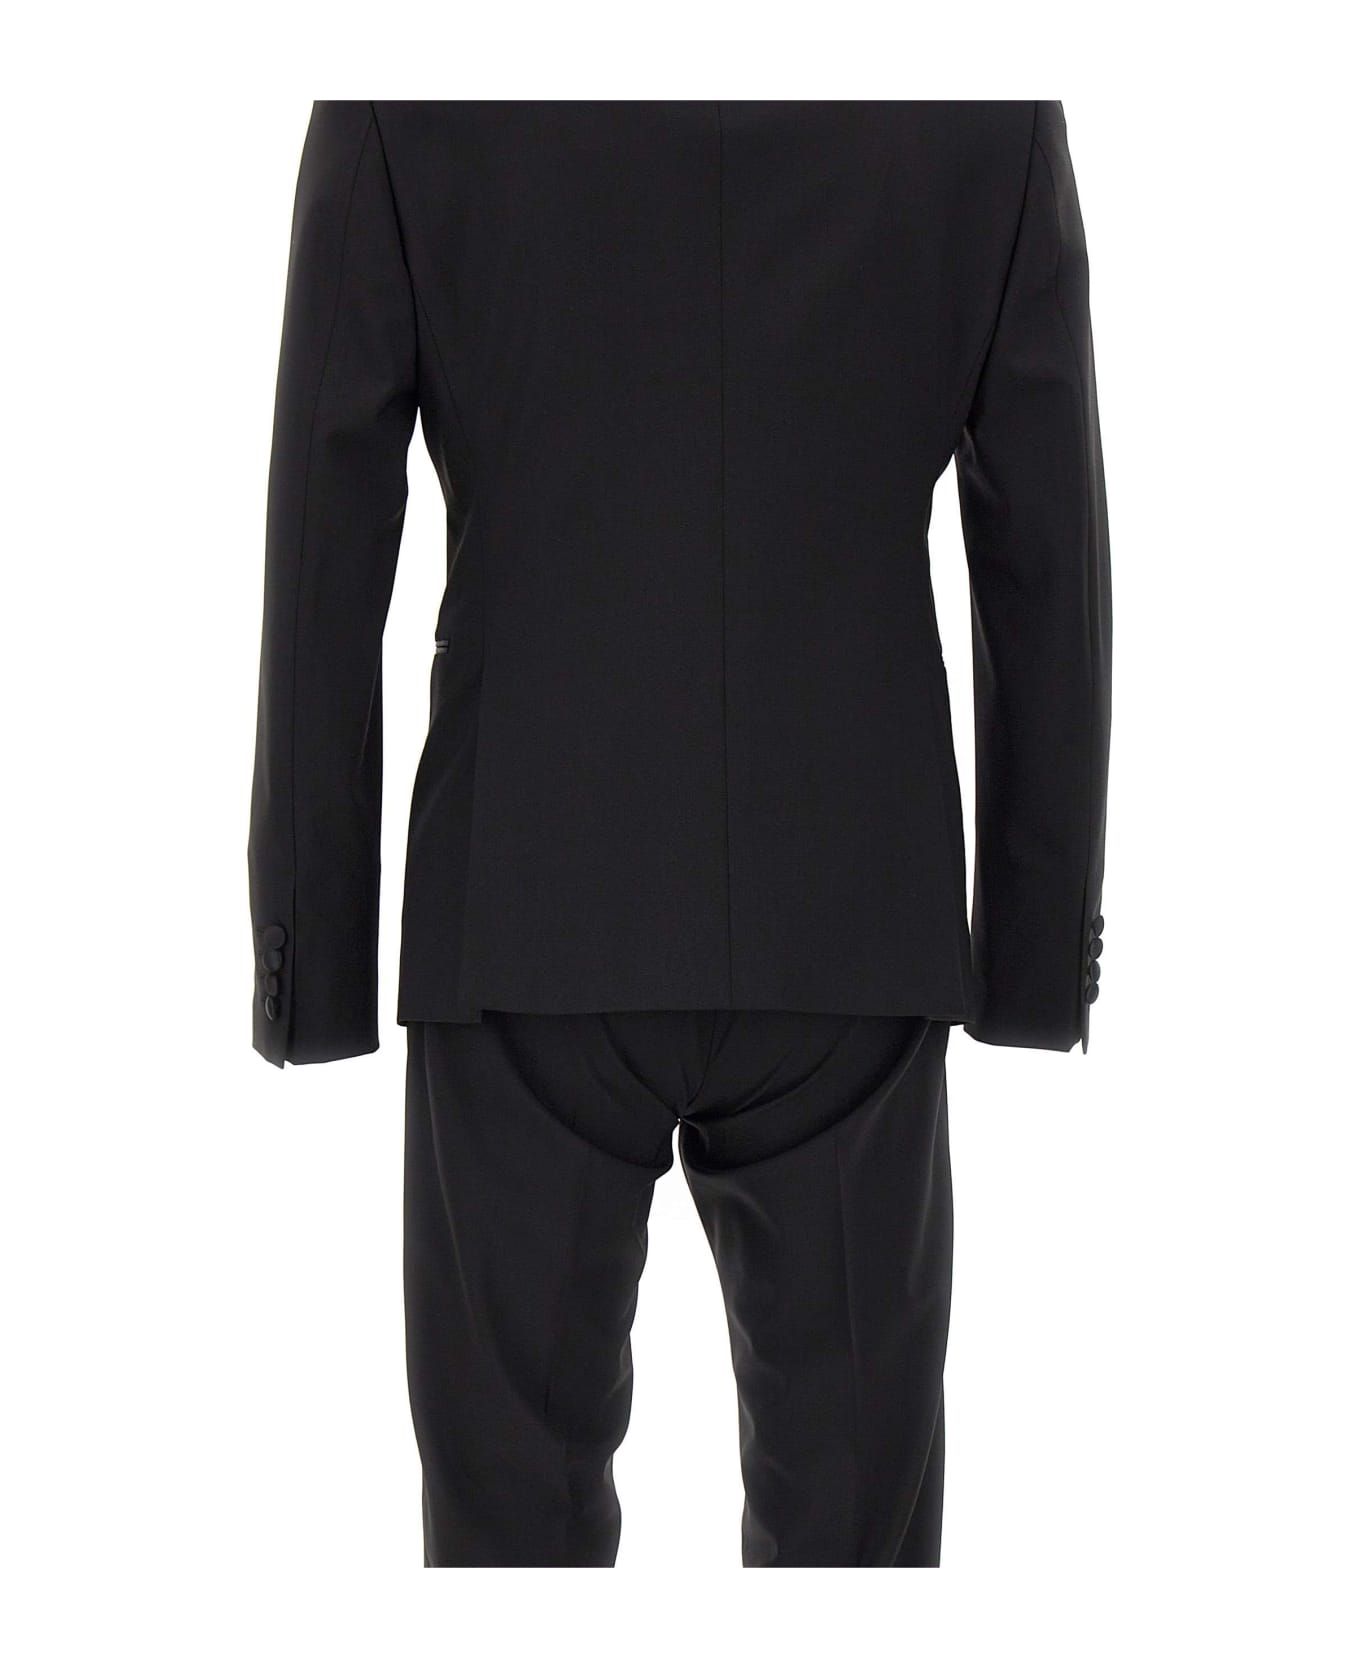 Emporio Armani Cool Wool Two-piece Formal Suit - BLACK スーツ